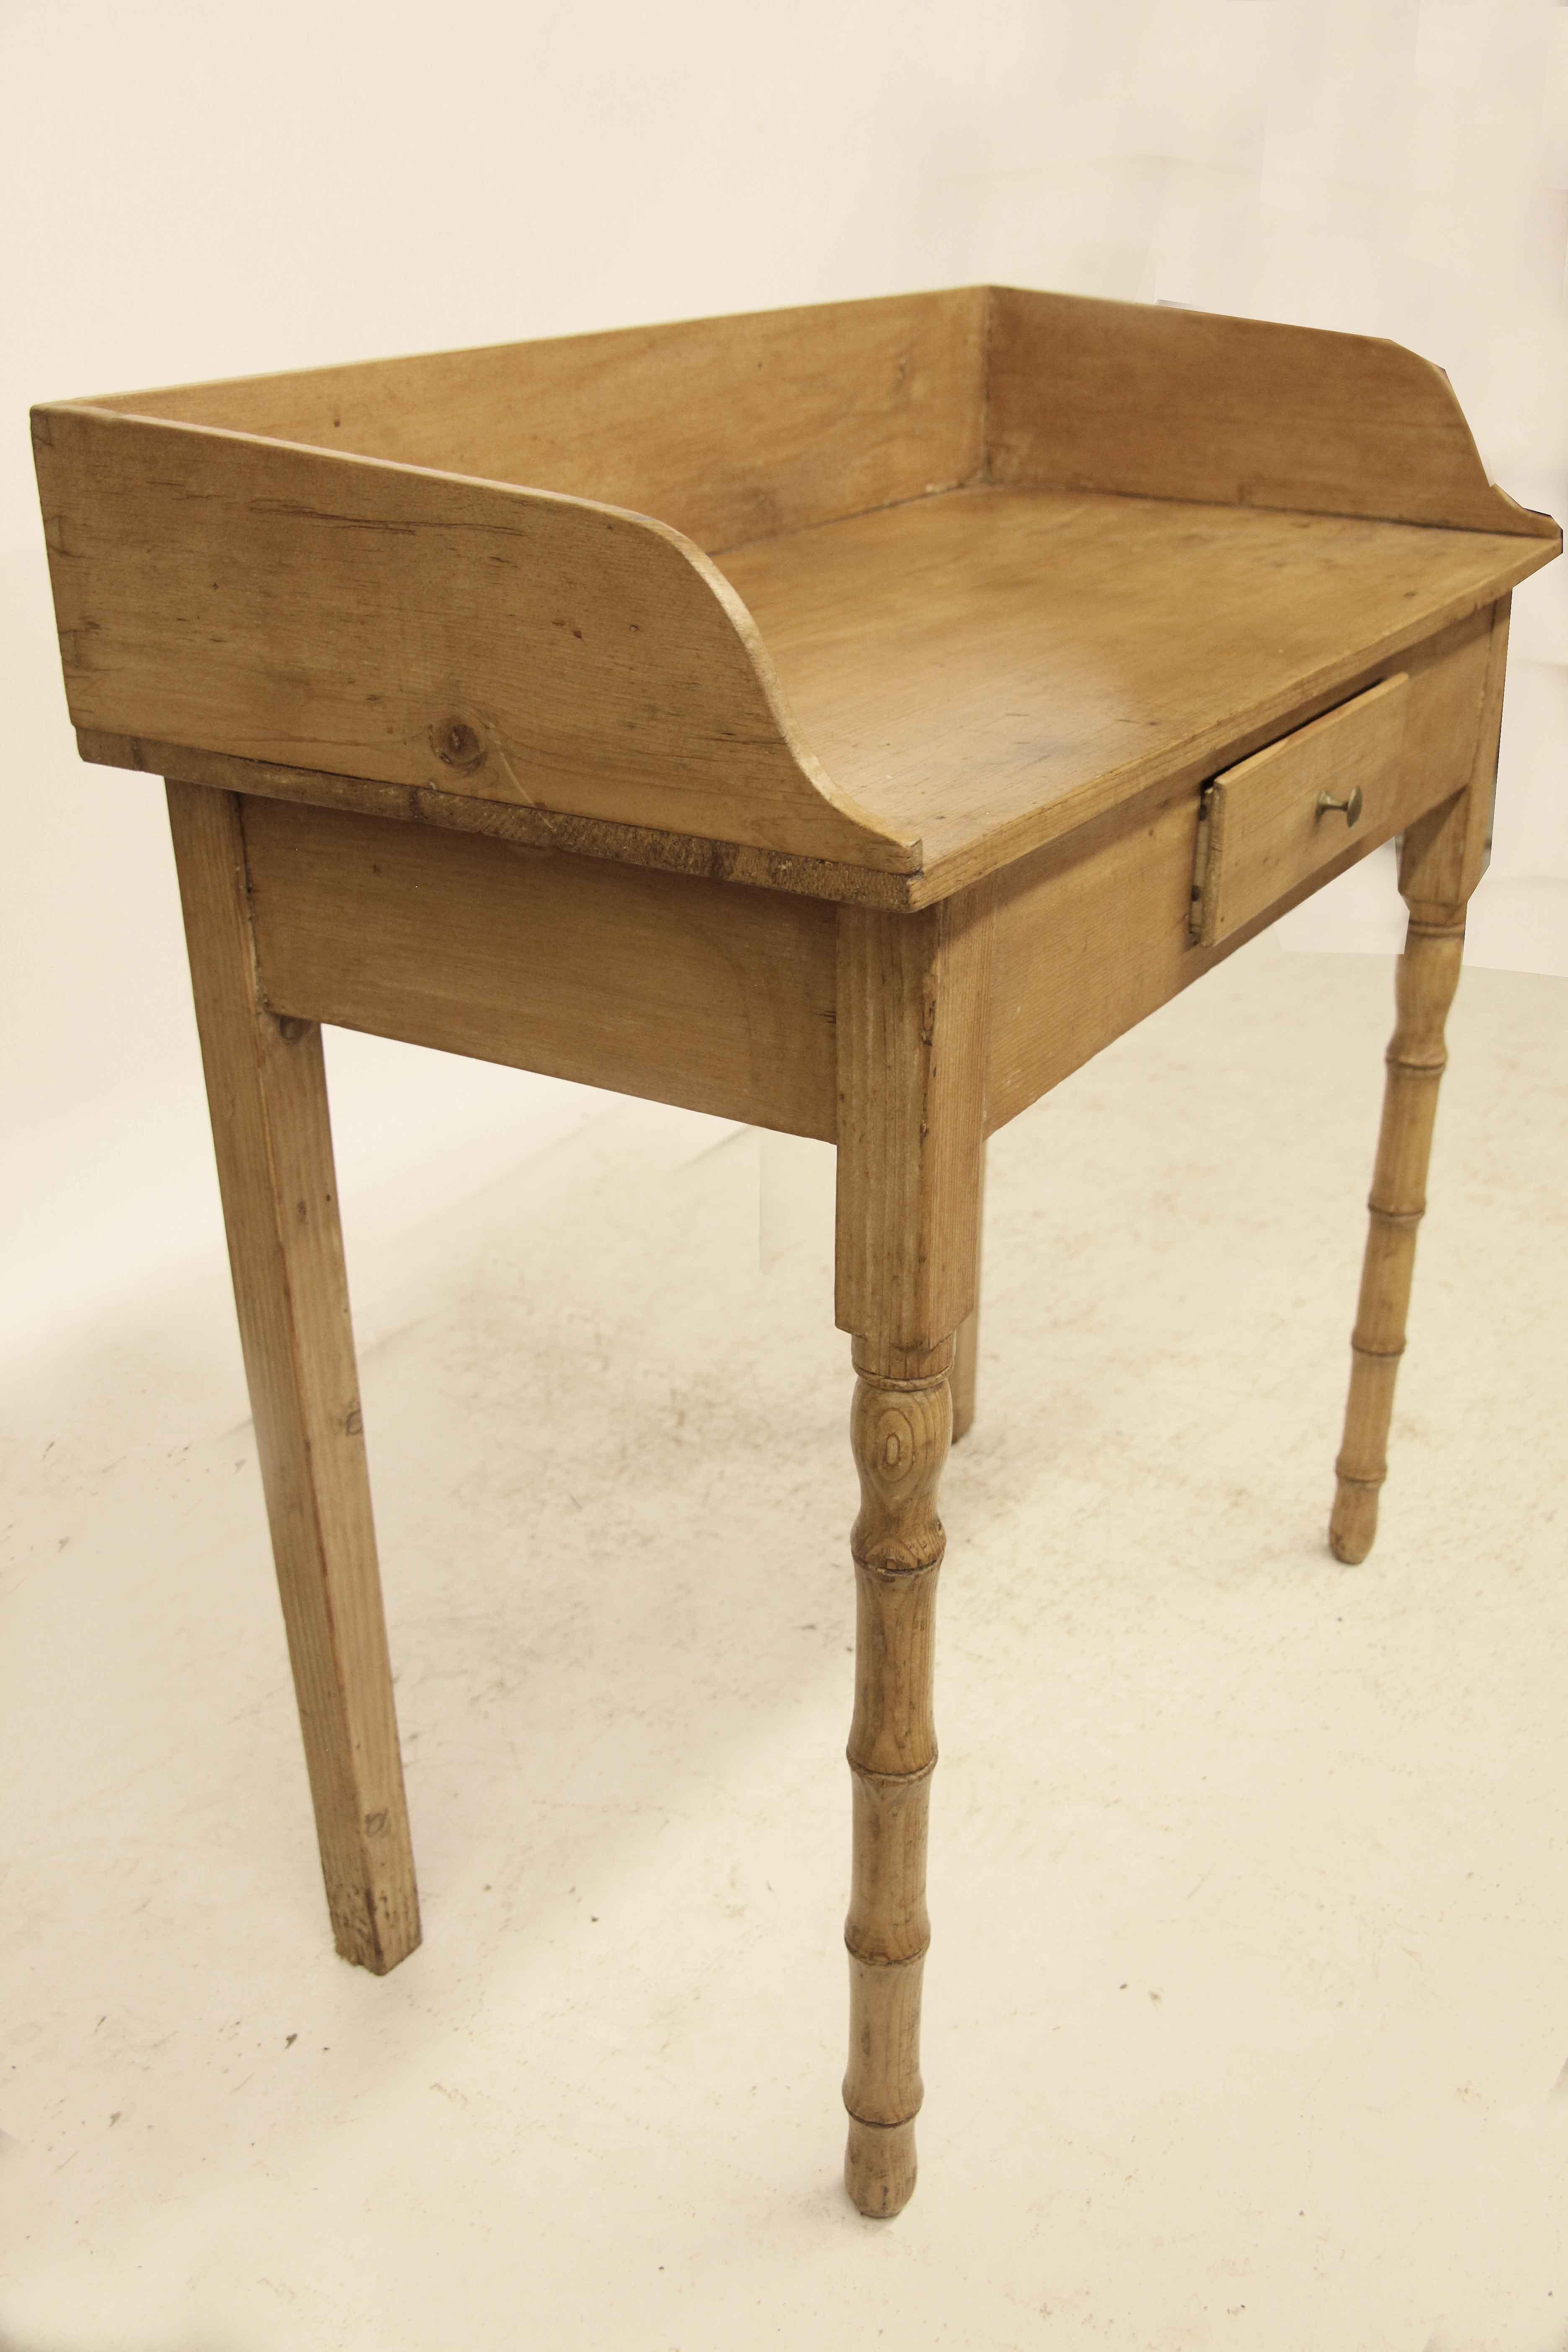 Faux bamboo pine one drawer table, the top with gallery surround, front legs with faux bamboo turnings, back legs are square; single drawer with brass knob. Since there is sufficient overhang on the sides and back, if desired, the gallery could be